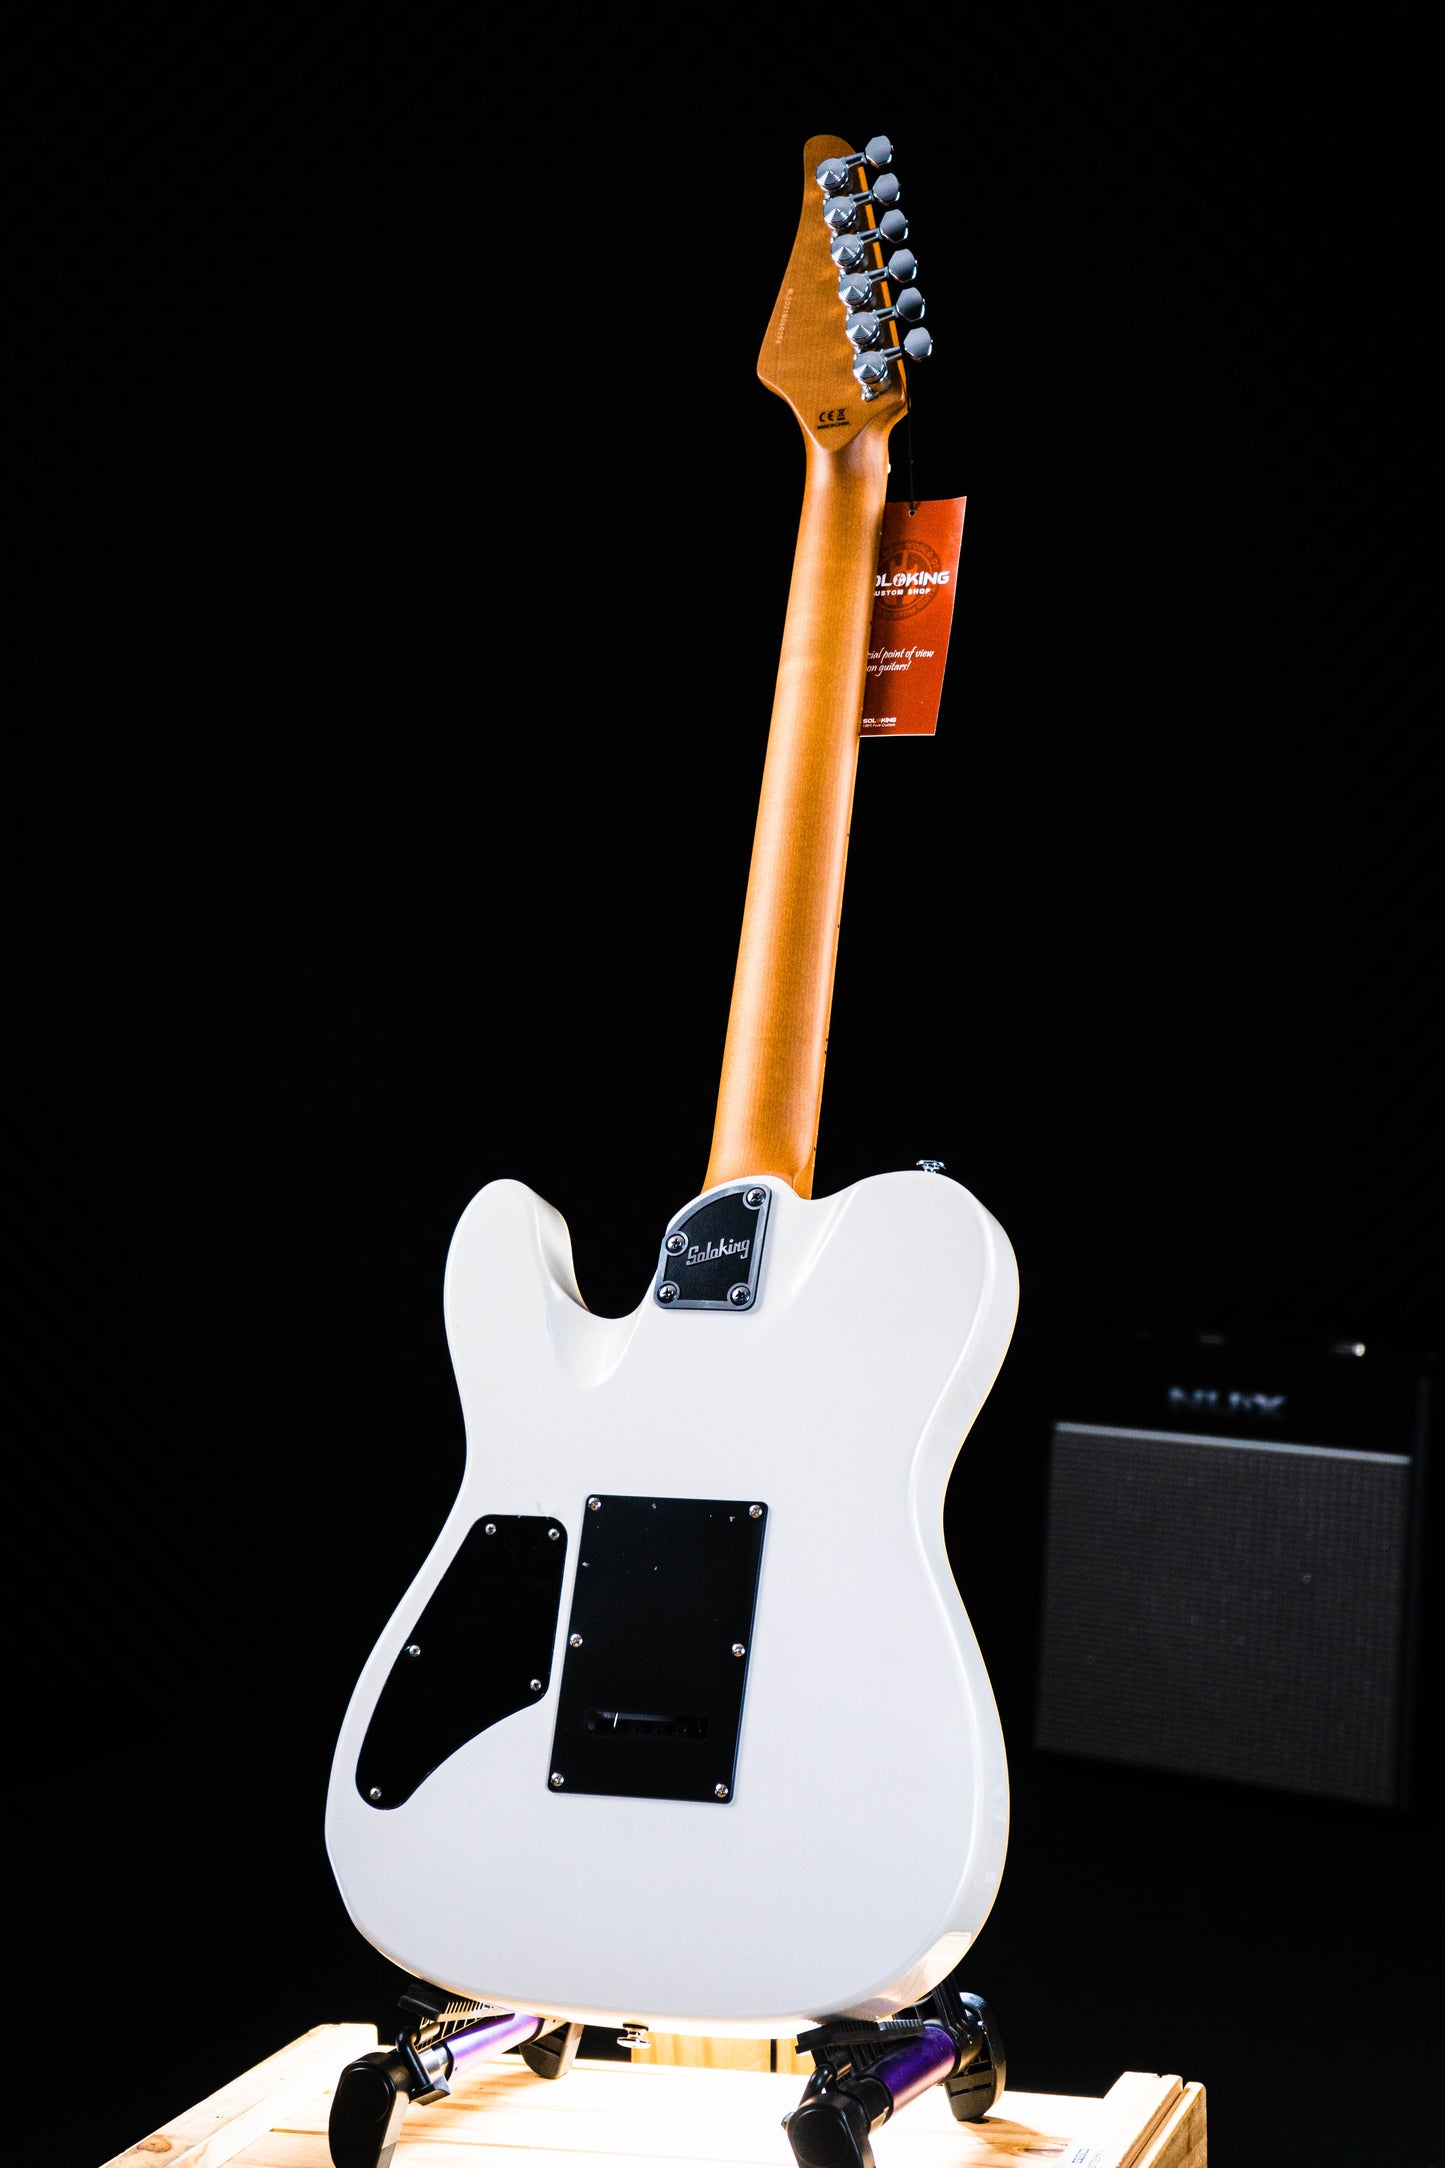 Soloking MT-1 Modern HH in Pearl White Metallic with Roasted Maple Neck and FB